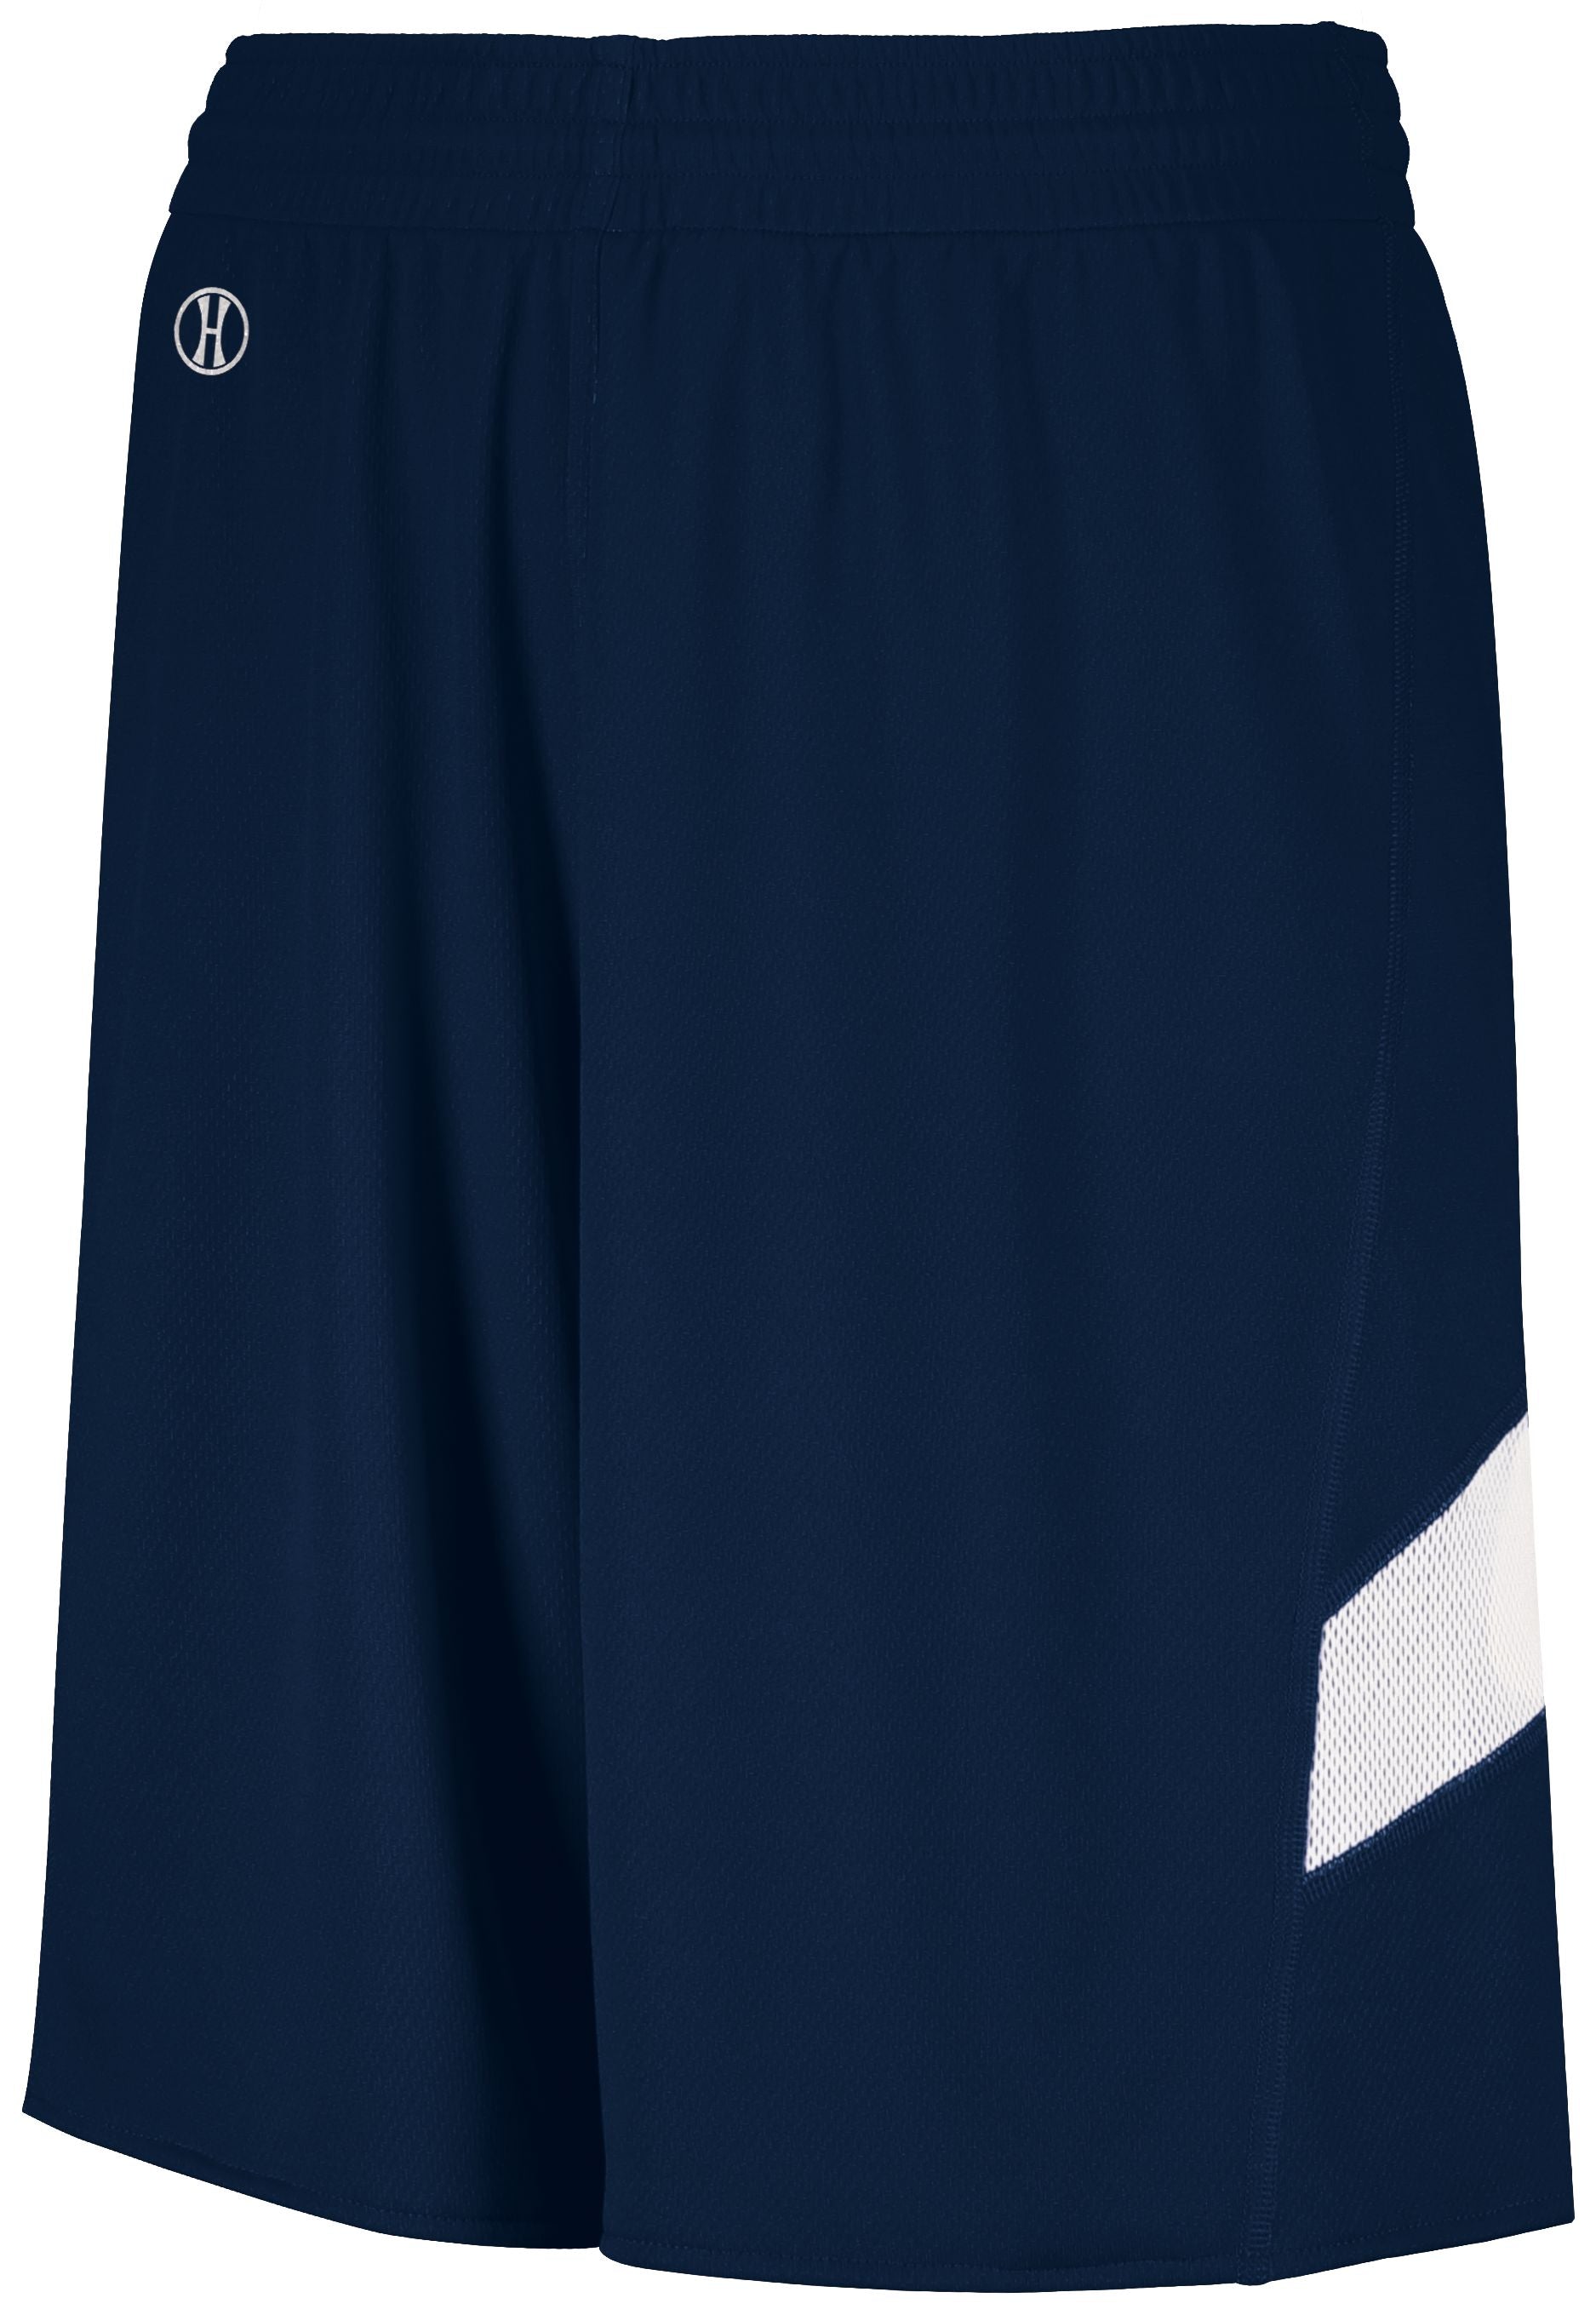 Holloway Youth Dual-Side Single Ply Basketball Shorts in Navy/White  -Part of the Youth, Youth-Shorts, Basketball, Holloway, All-Sports, All-Sports-1 product lines at KanaleyCreations.com